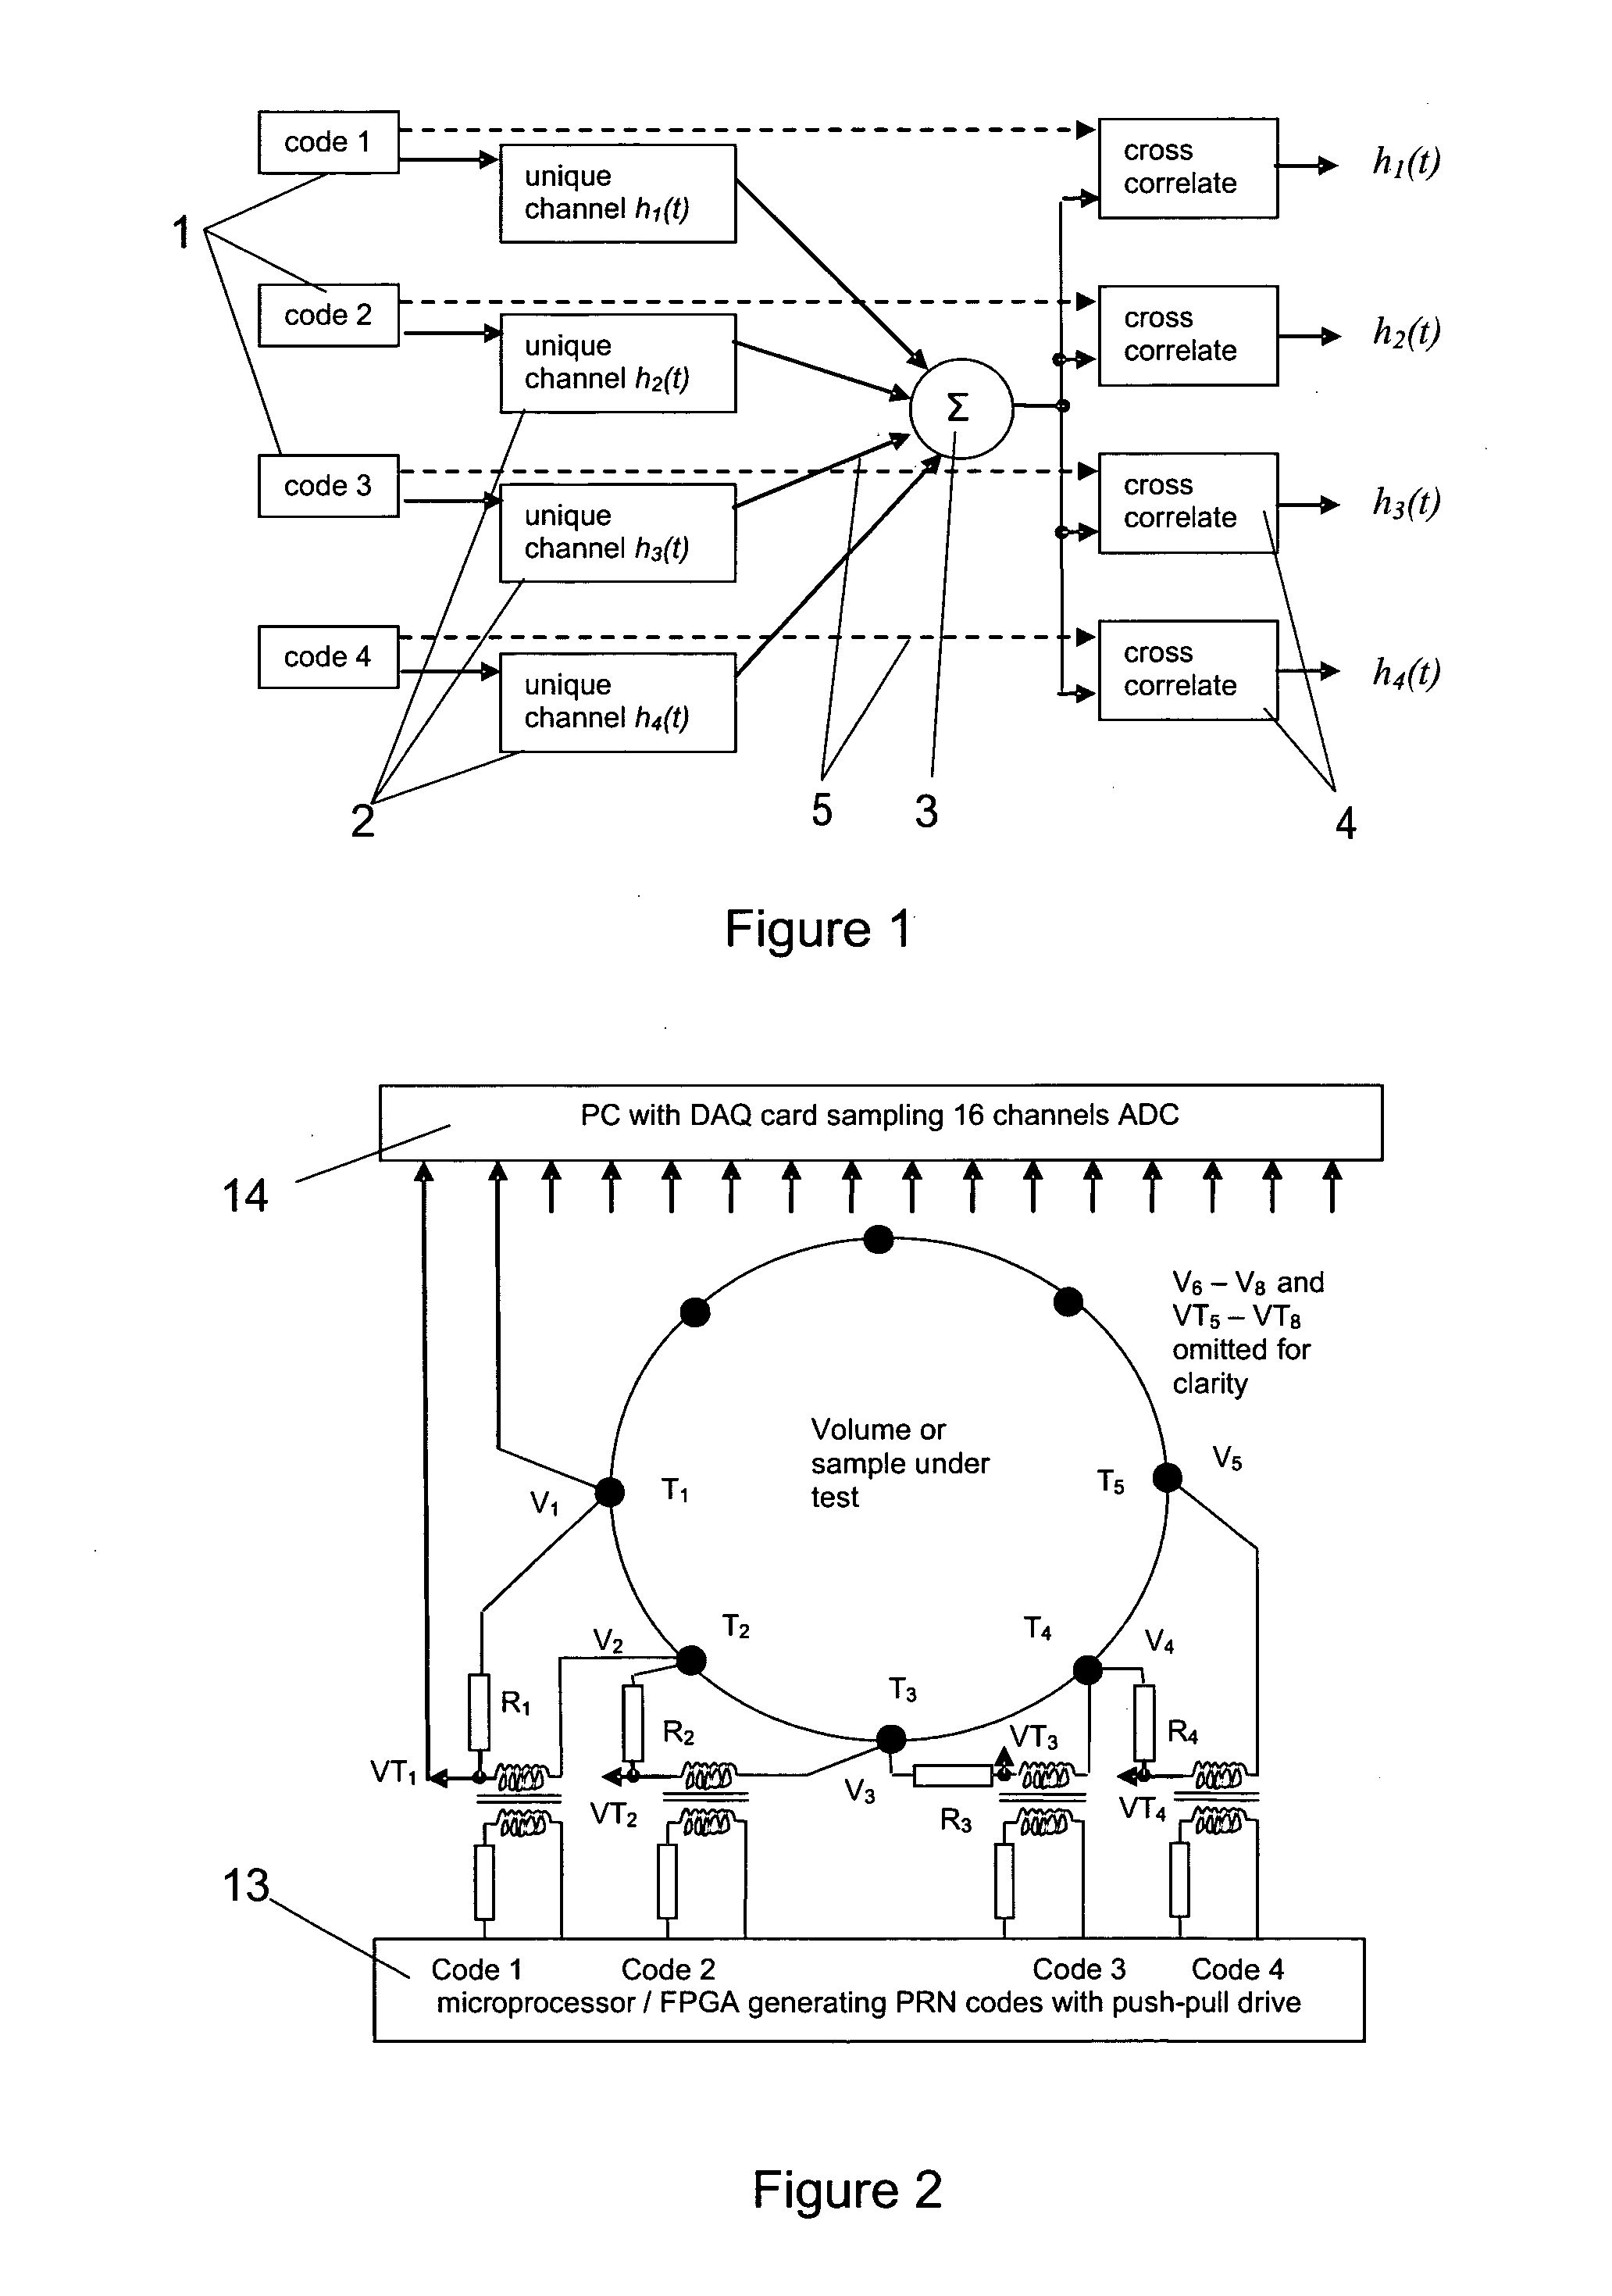 System and Method for Conducting Multiplexed Electrical Impedance Tomography